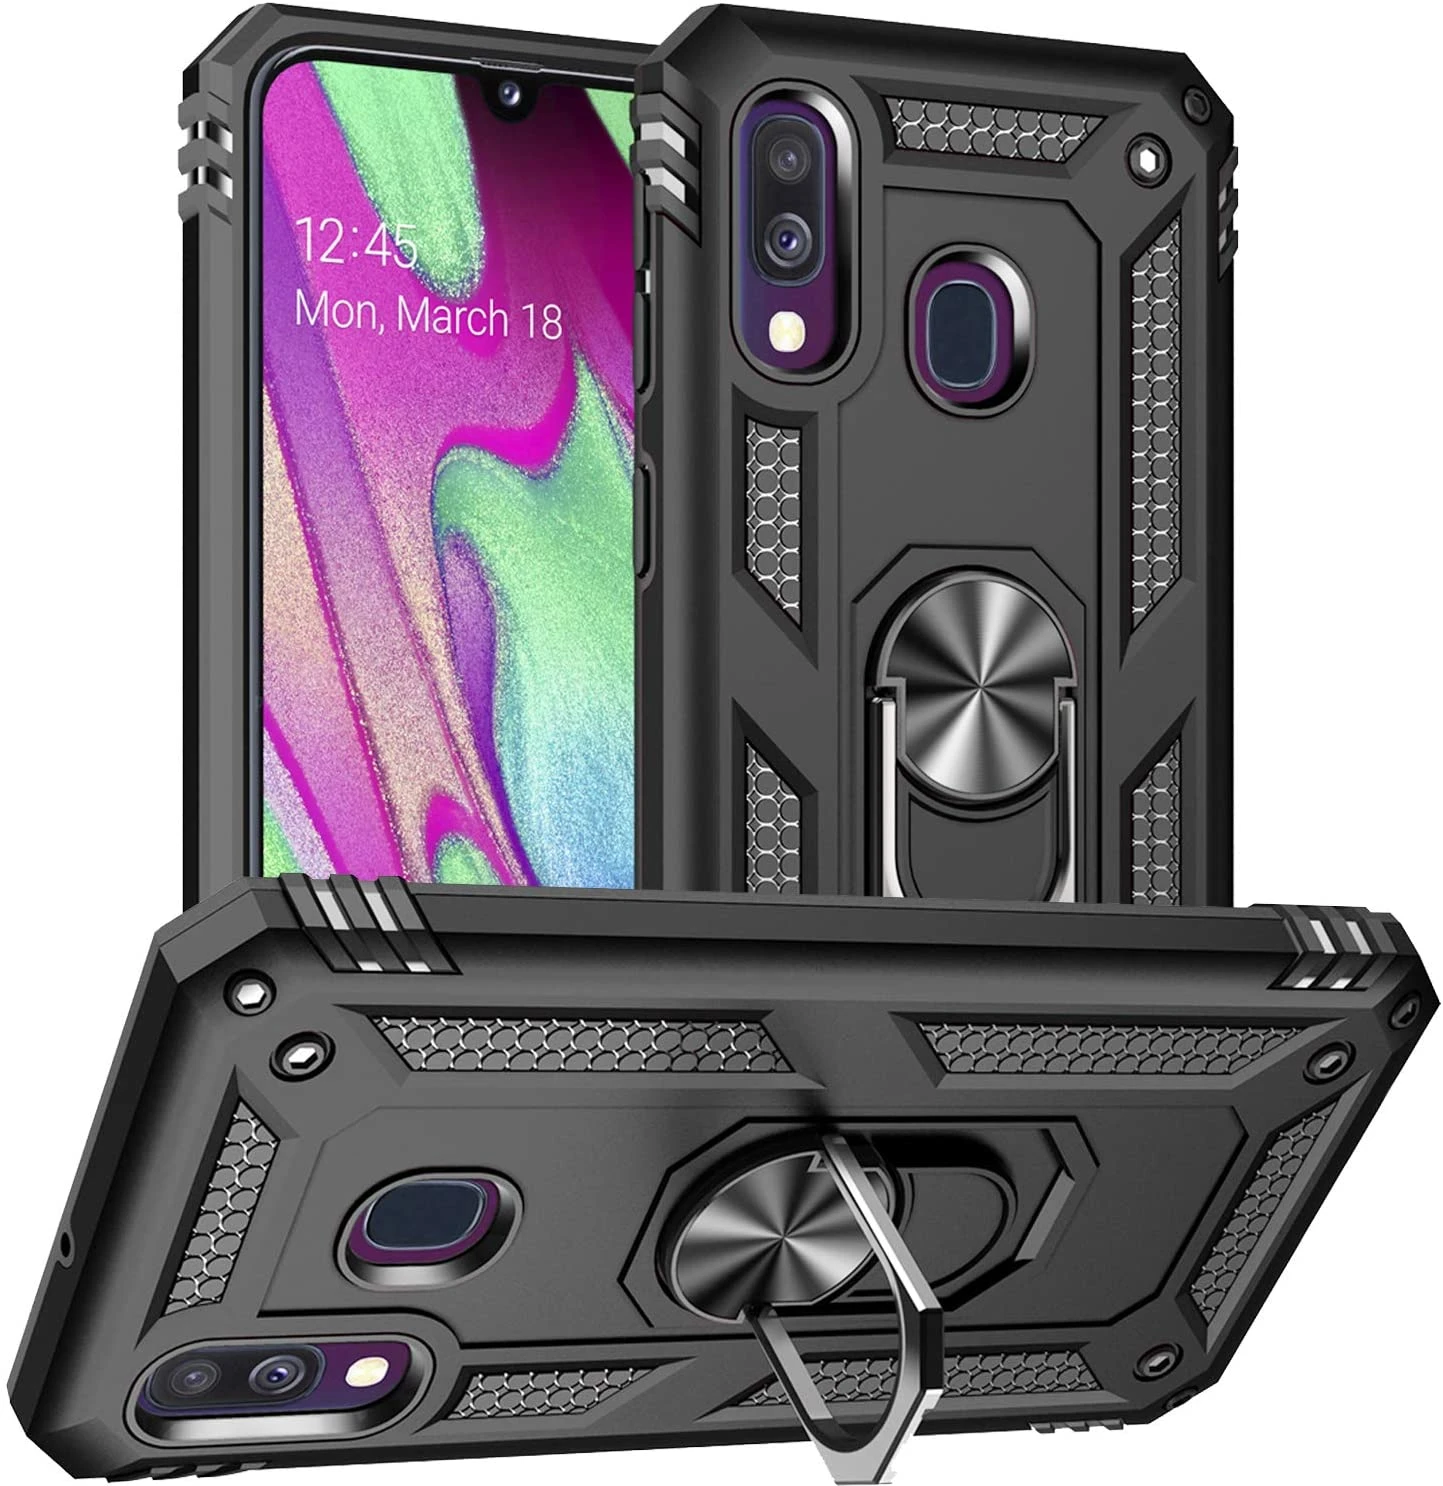 Toepassen Verdorren Verlengen for Samsung A40 Case Cover Samsung Galaxy A40 A 40 Armor Rugged Military  Shockproof Magnet Car Holder Ring Case|Phone Case & Covers| - AliExpress